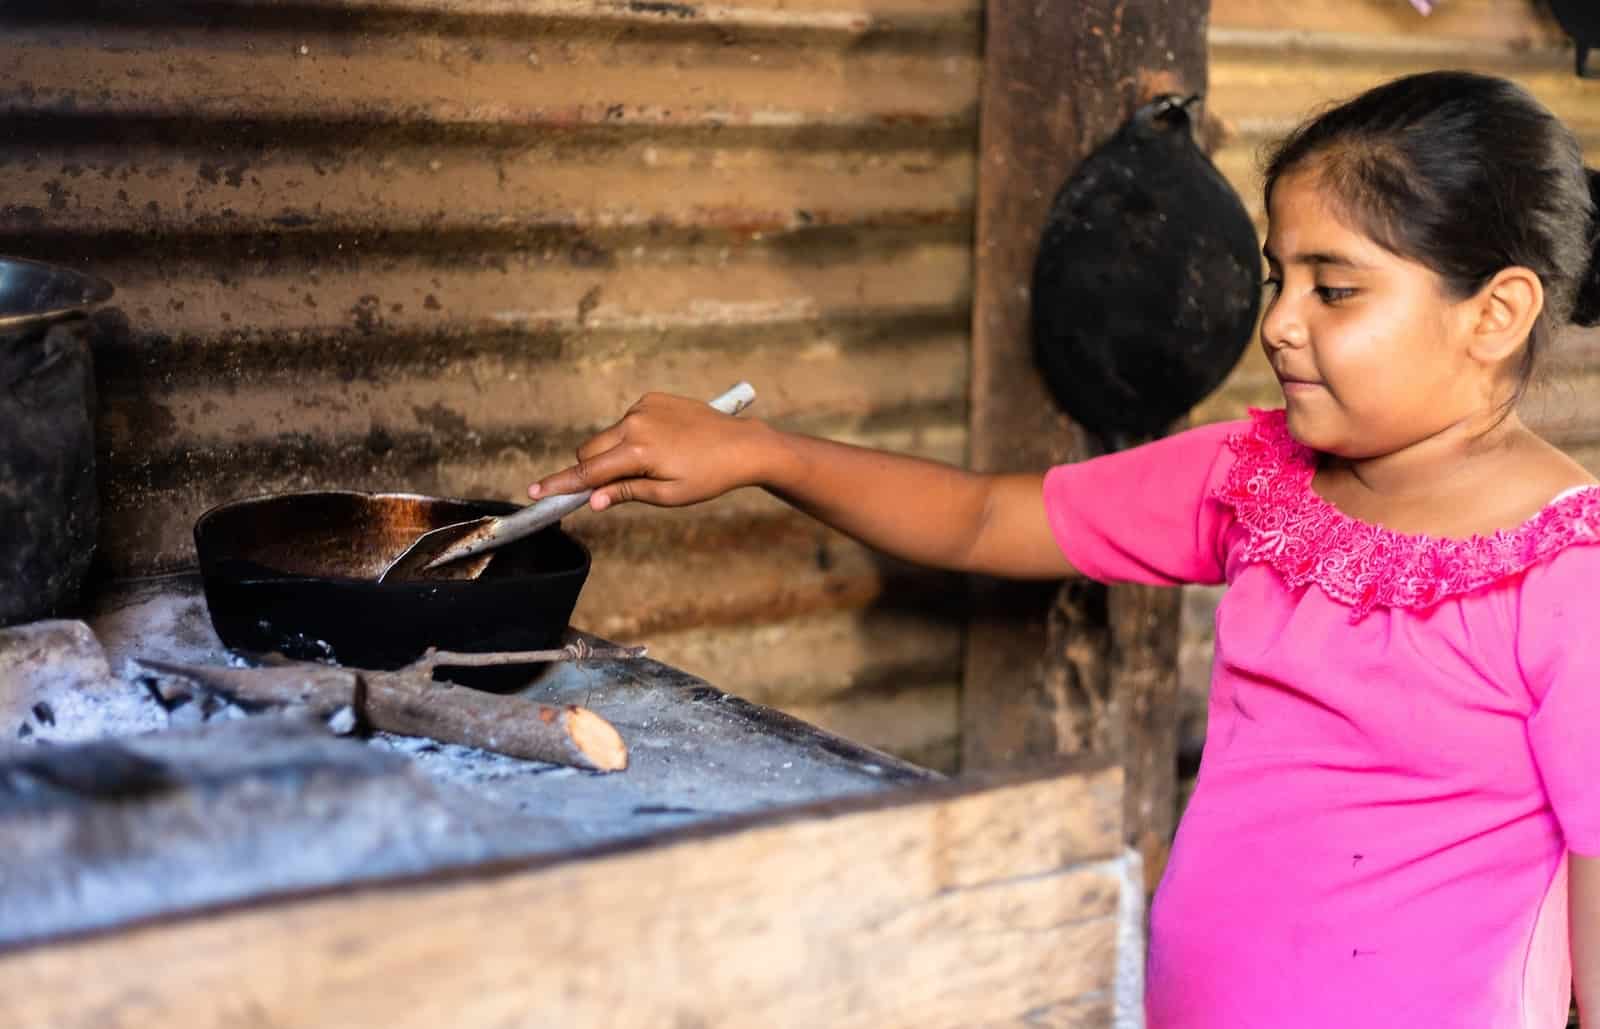 A girl in a pink shirt stands in front of a wooden block with a black pan on it, stirring something in the pan with a spatula. the wall is made of corrugated metal sheets.